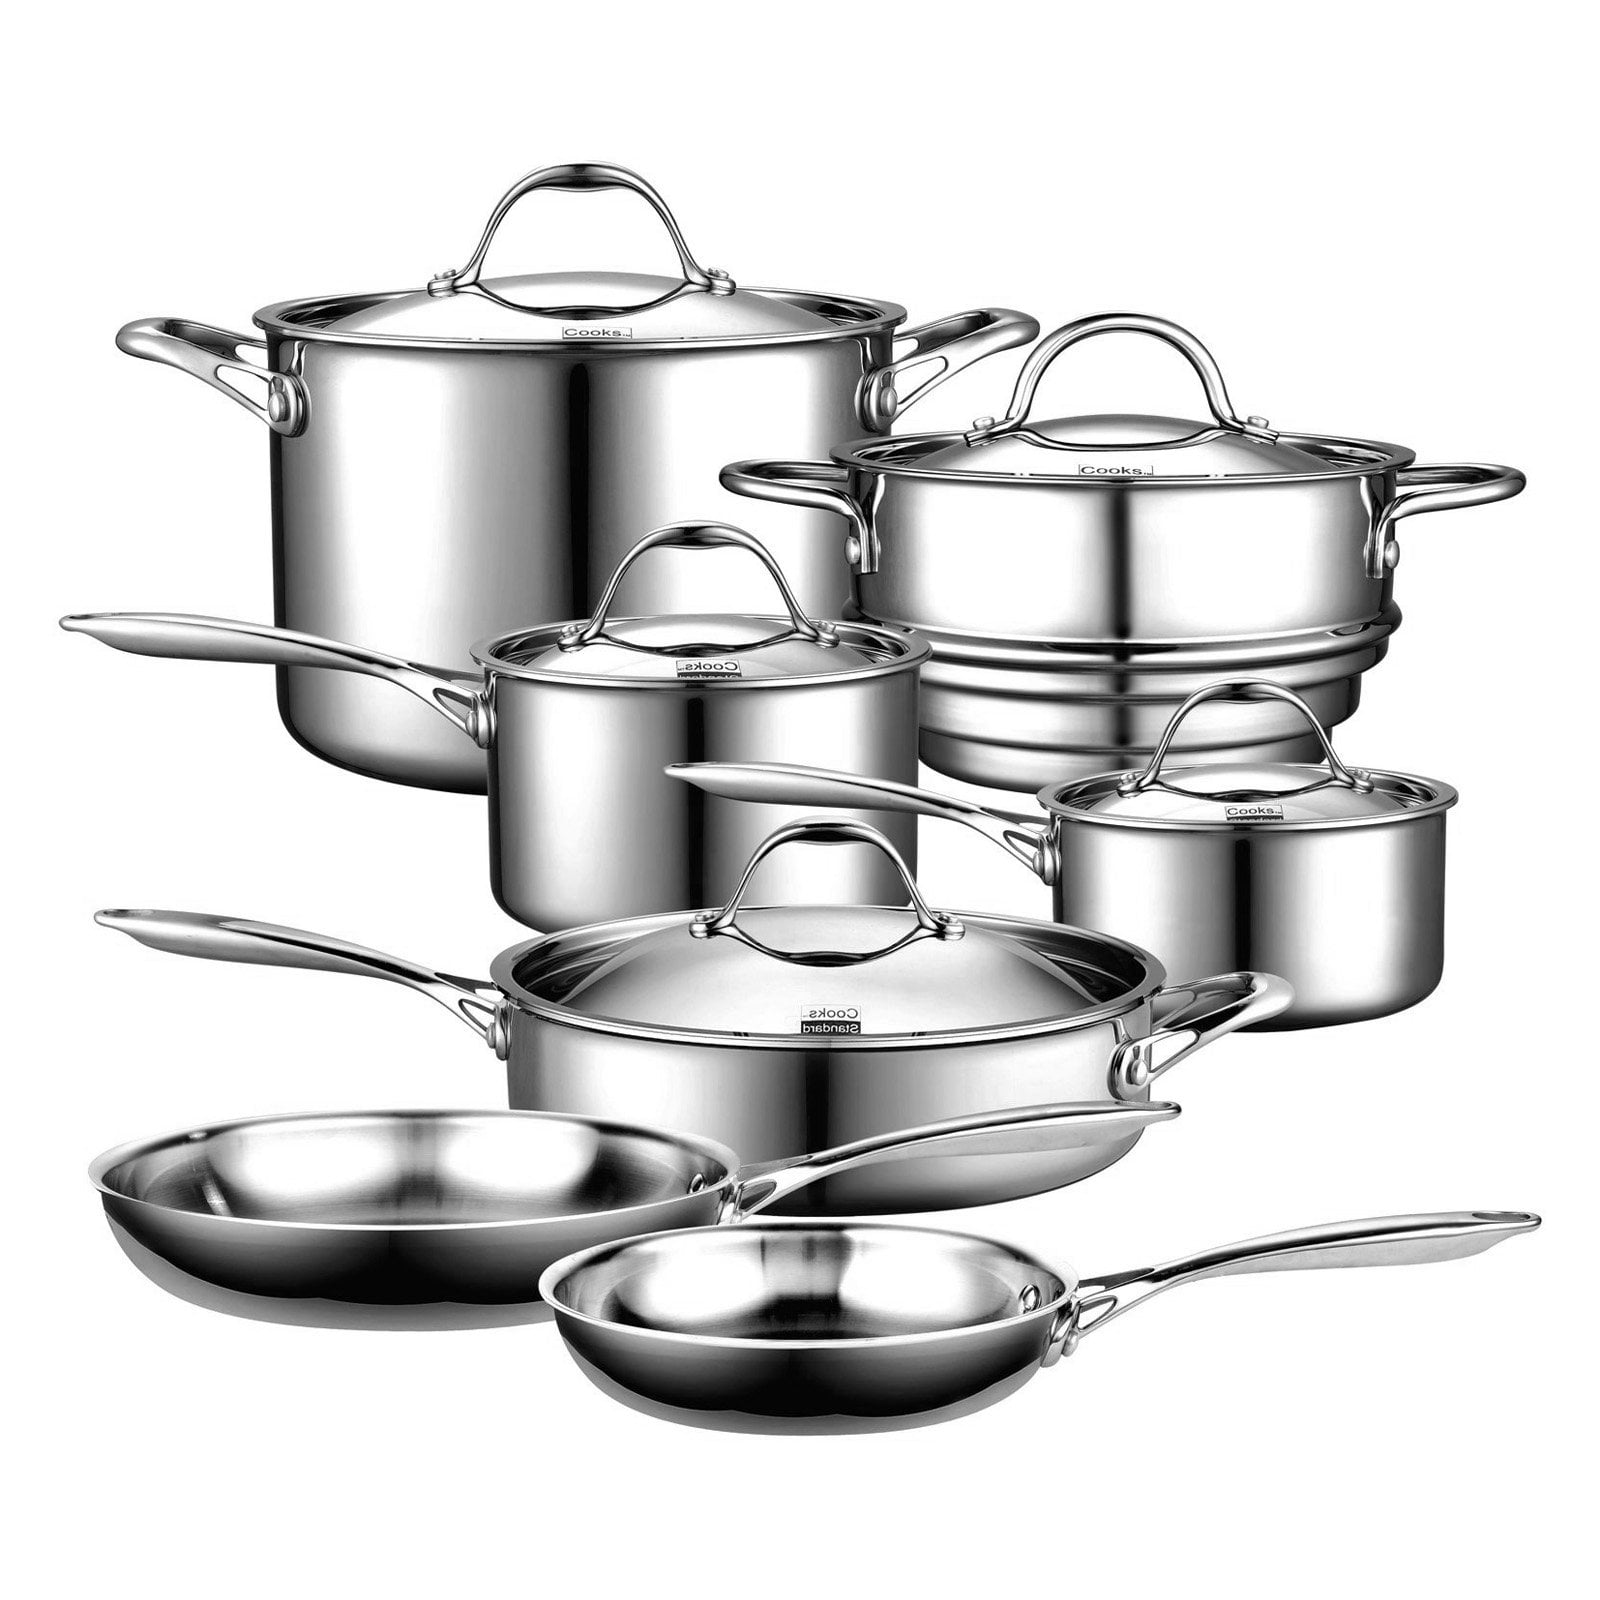  Cooks  Standard Multi ply Clad Stainless Steel 12 Piece 